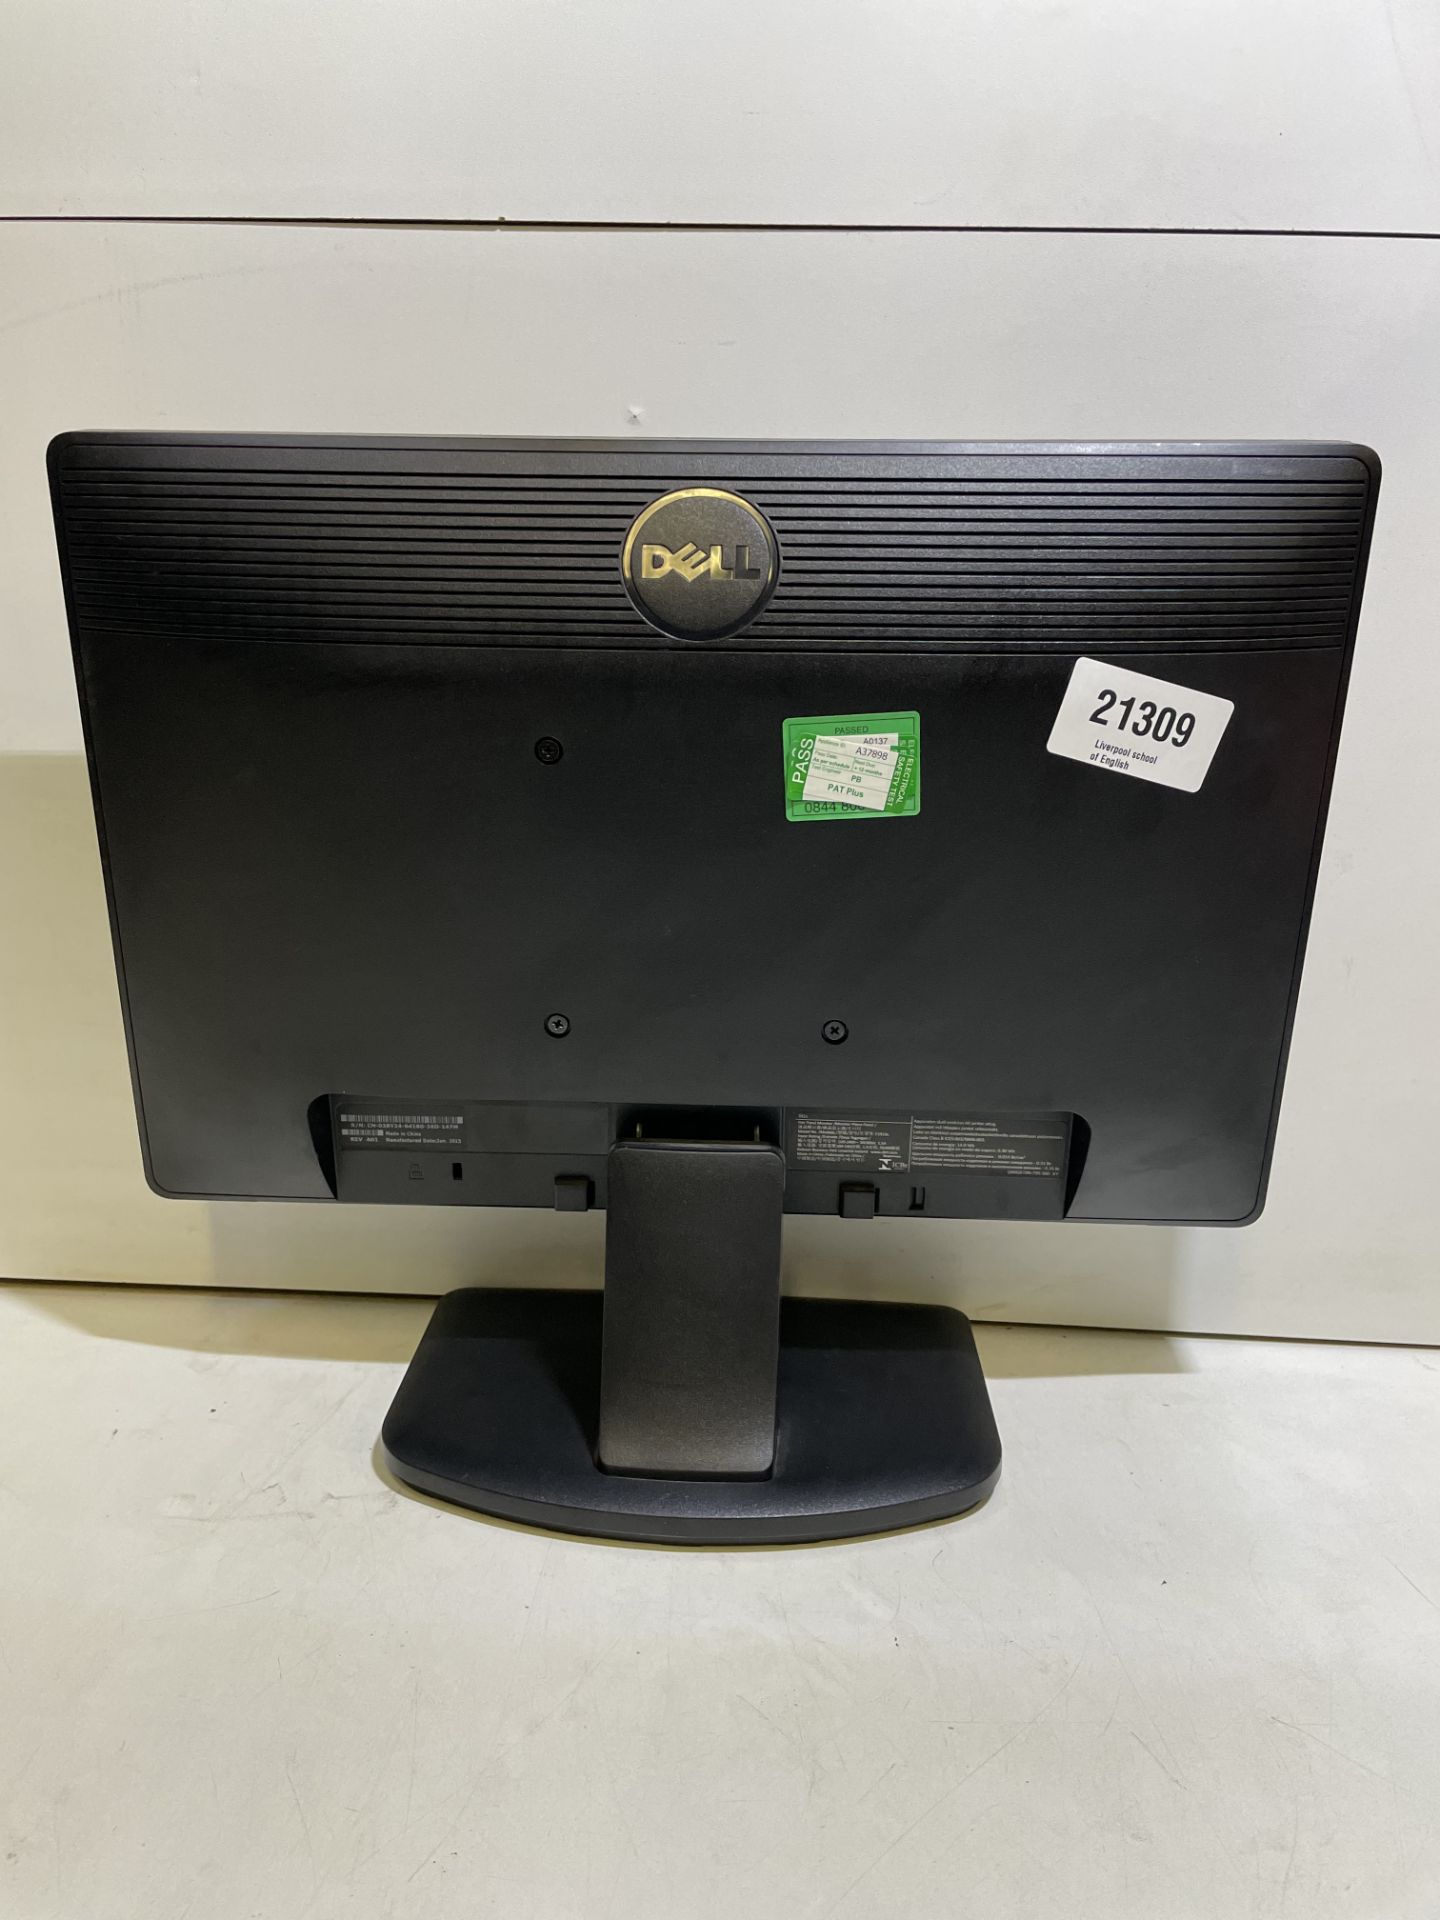 8 X Dell IN2020 20-inch Widescreen LCD TFT Monitor - Image 2 of 3